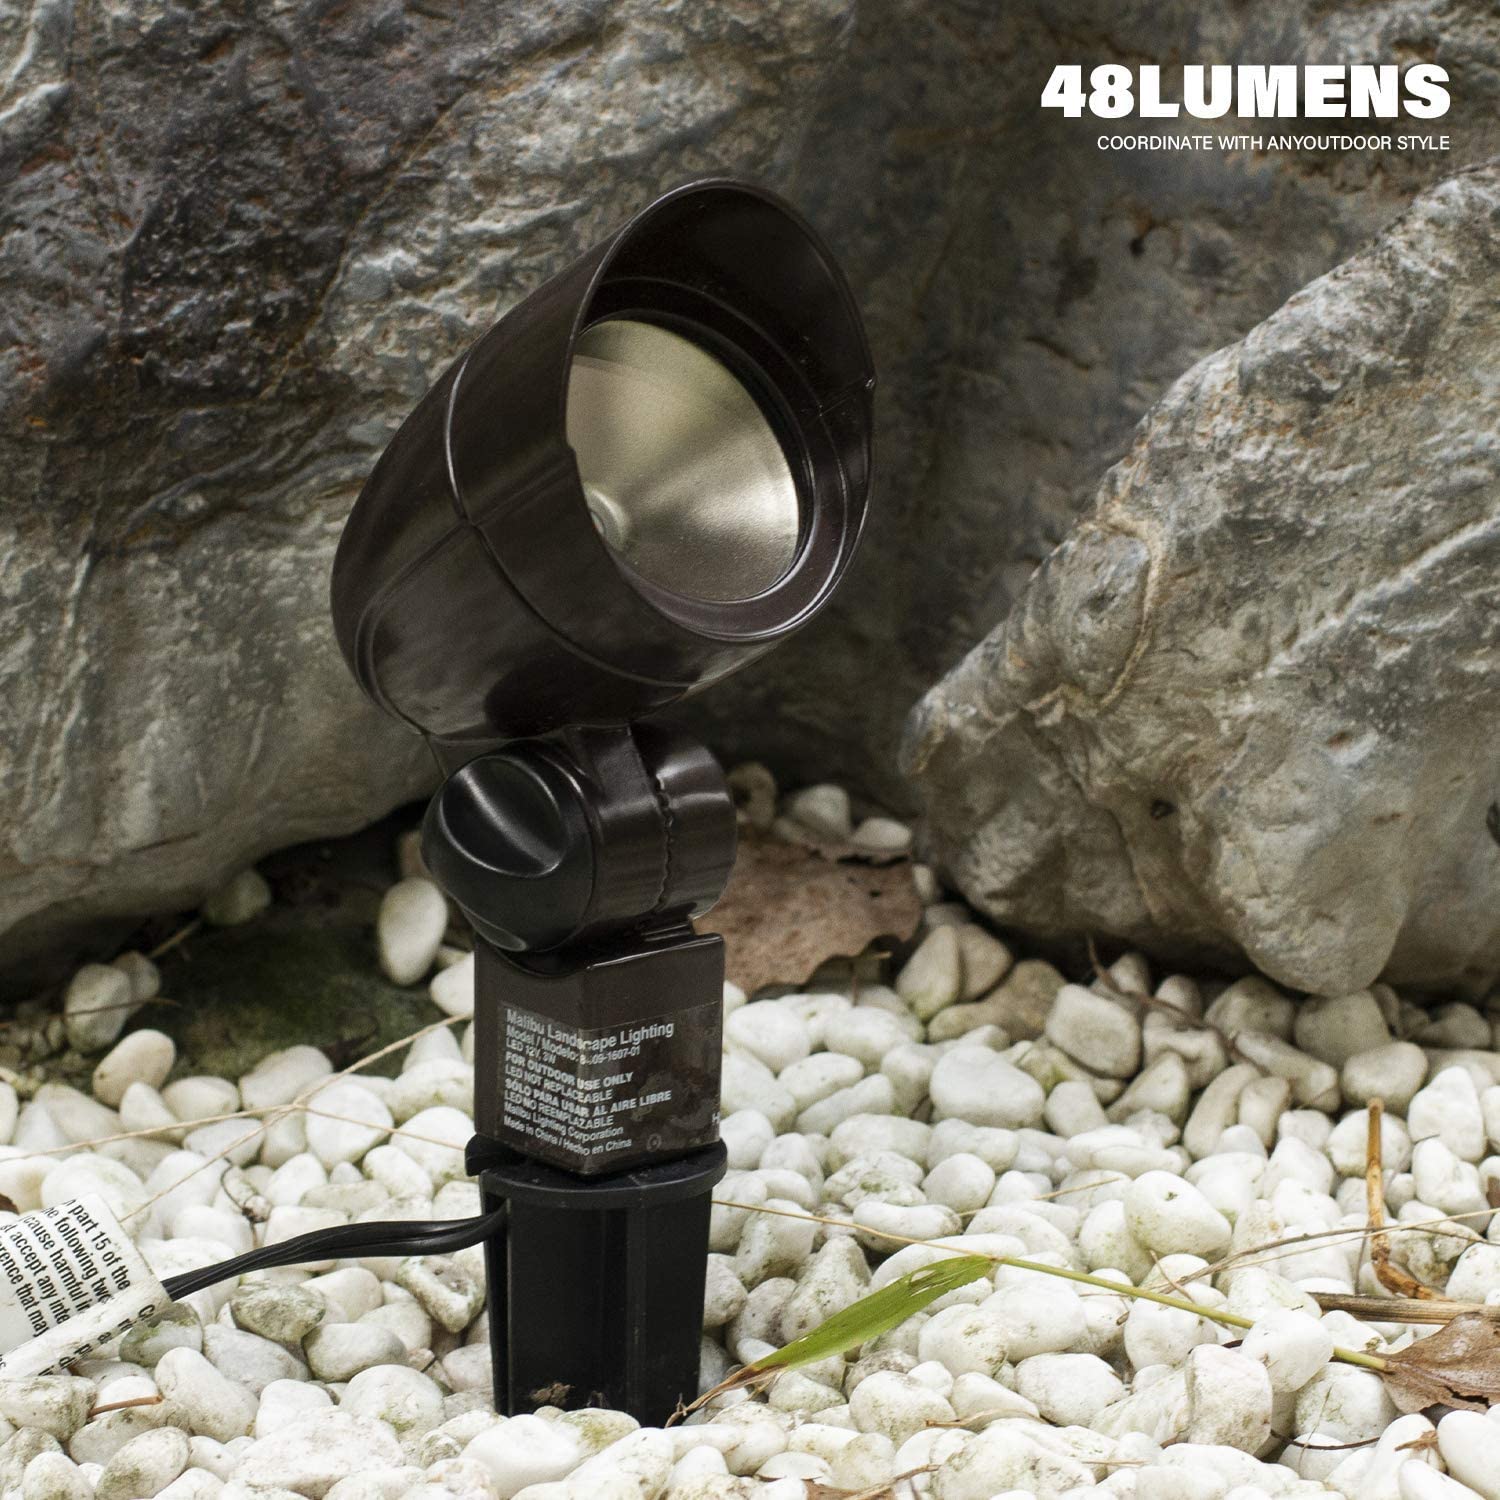 Malibu 3W Low Voltage LED Metal Landscape Light Corded-Electric Charcoal Brown Waterproof - image 2 of 7